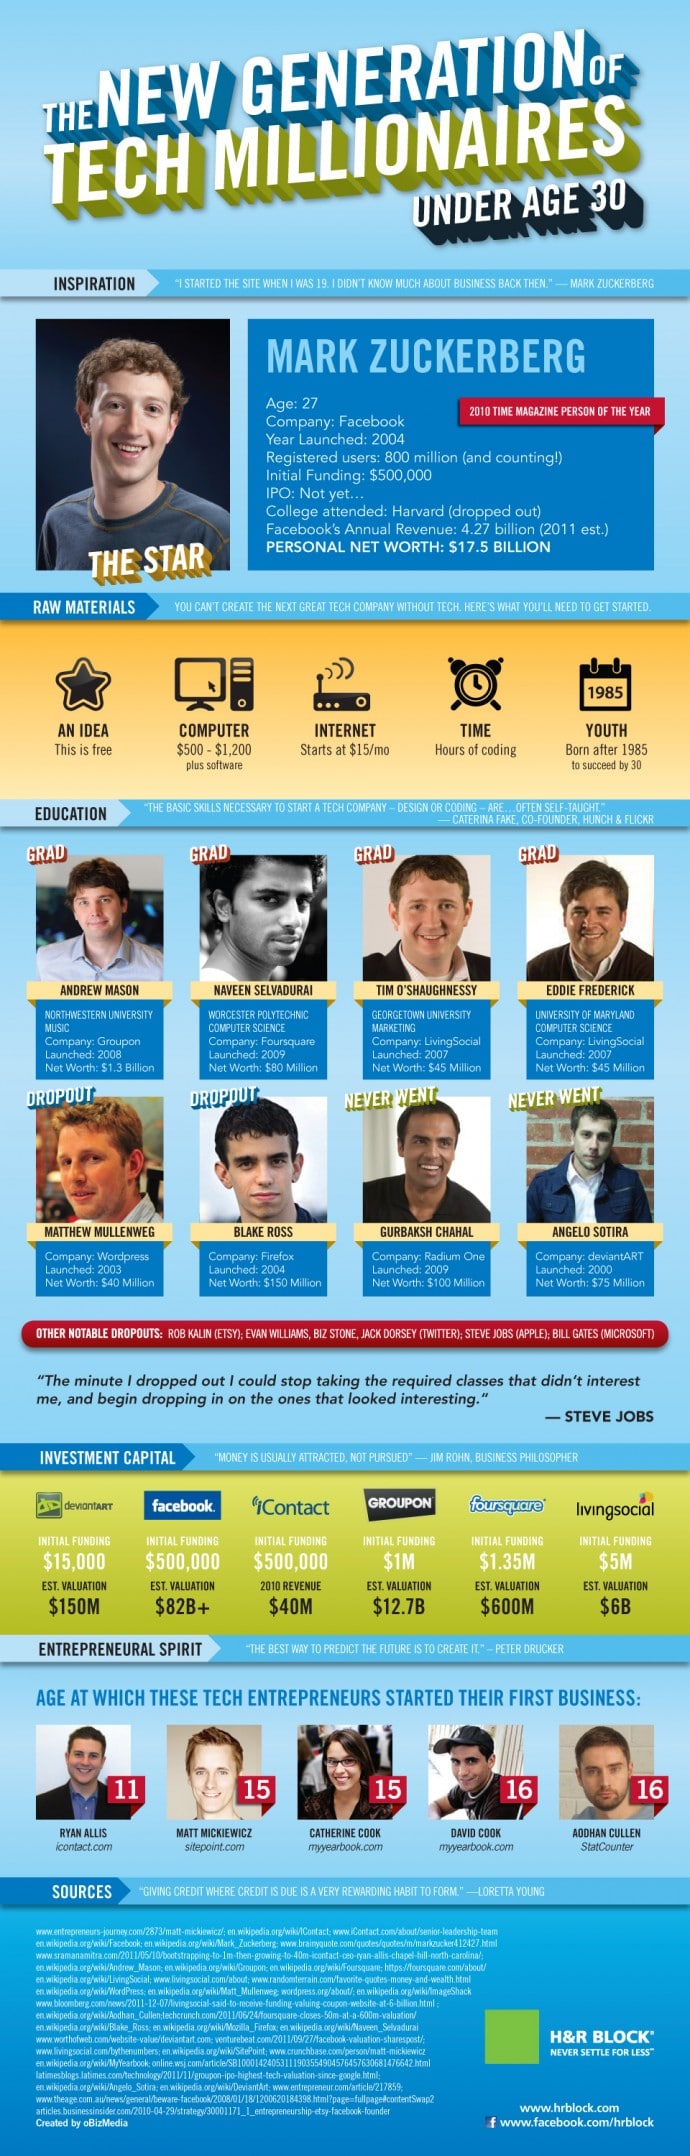 Tech Millionaires Under 30 Who Will Inspire You [Infographic]